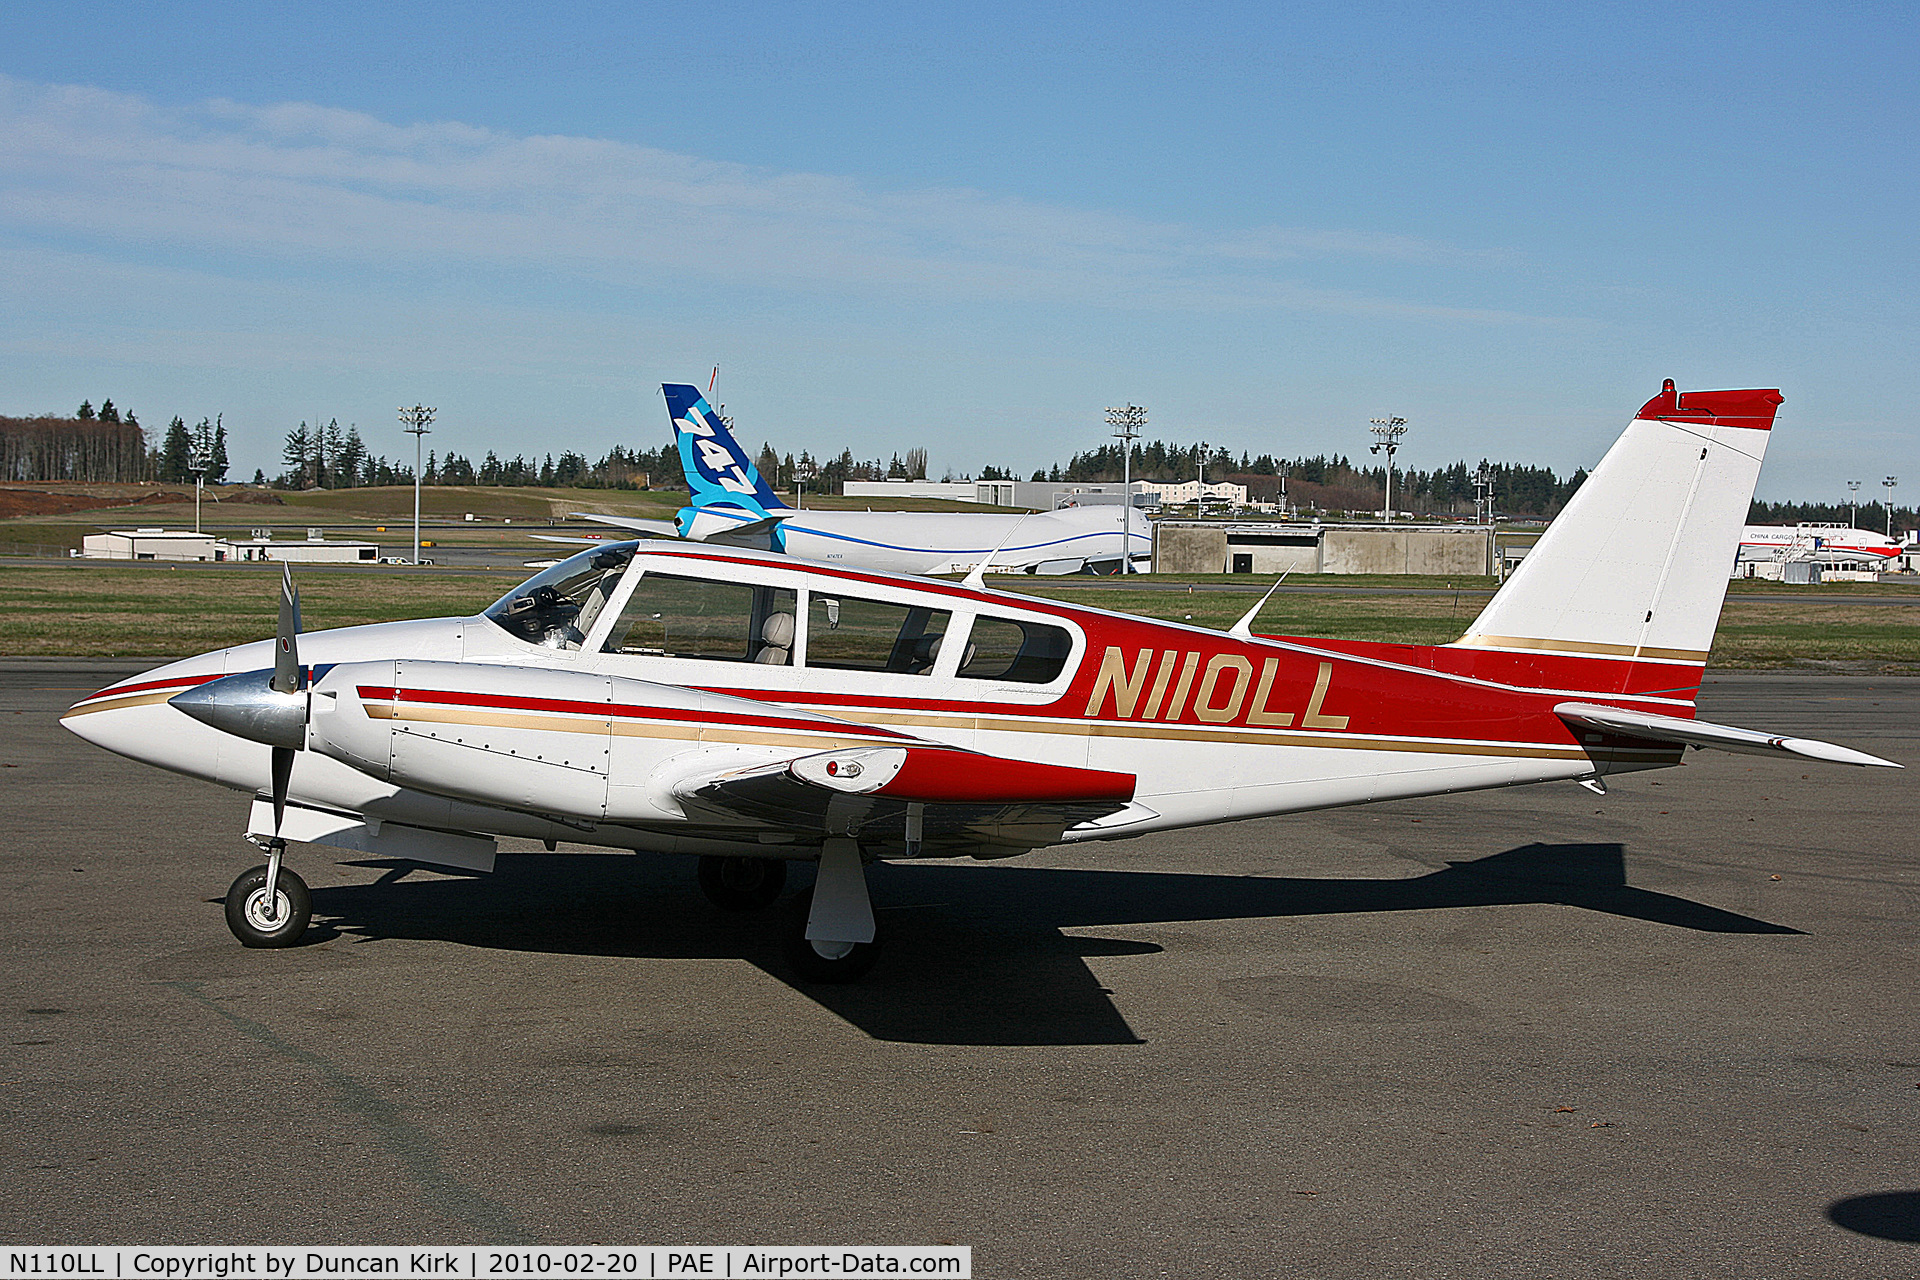 N110LL, 1971 Piper PA-39 C/N 39-89, Sweet looking Twin Comanche